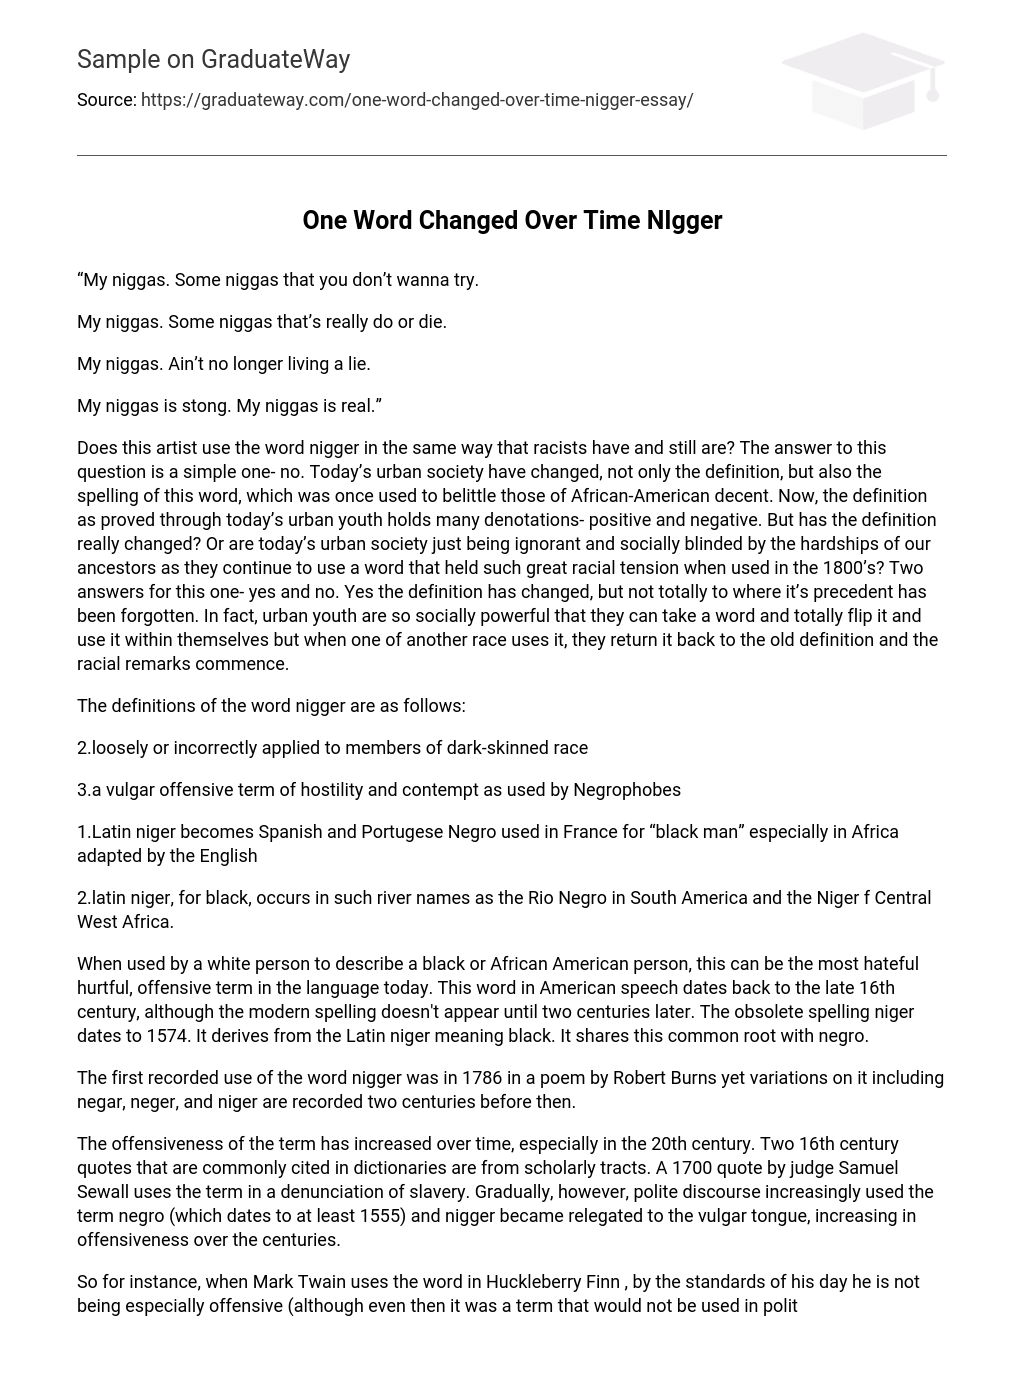 One Word Changed Over Time NIgger